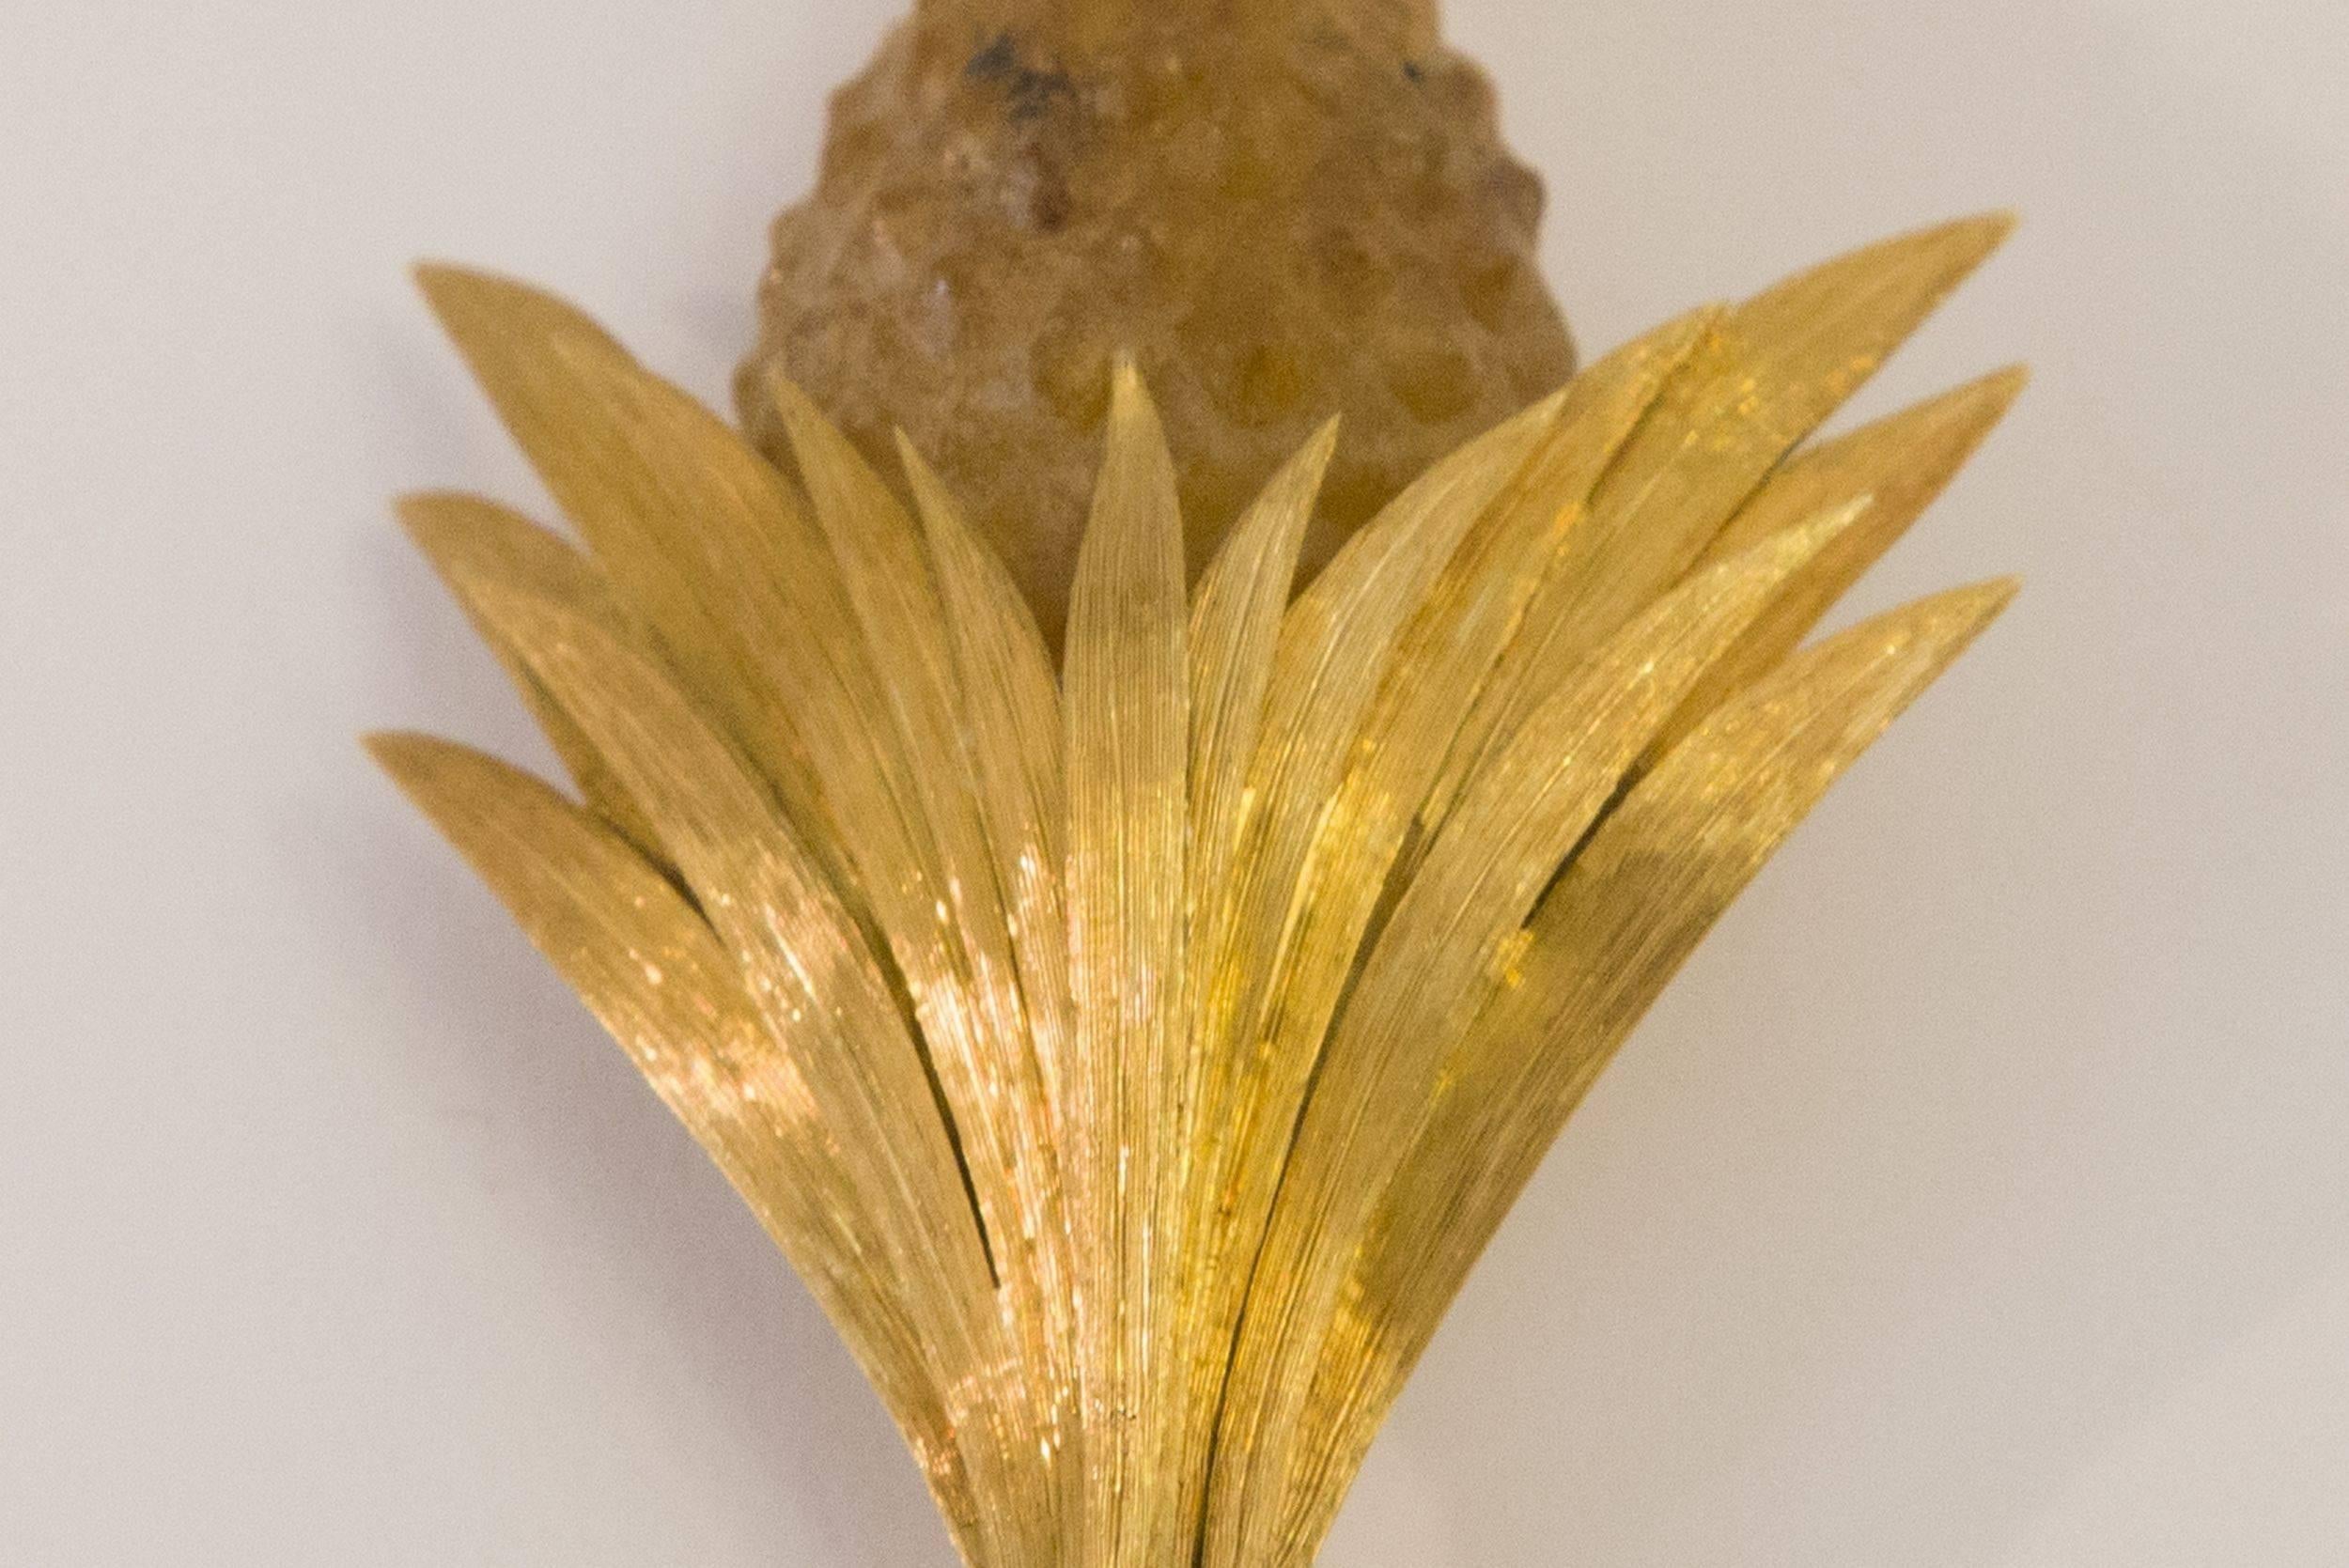 A Mario Buccellati pineapple clip, yellow gold leaves also engraved on the back - double needle griffes, one amber cut pineapple.

Item offered with “Certificate of Authenticity”.